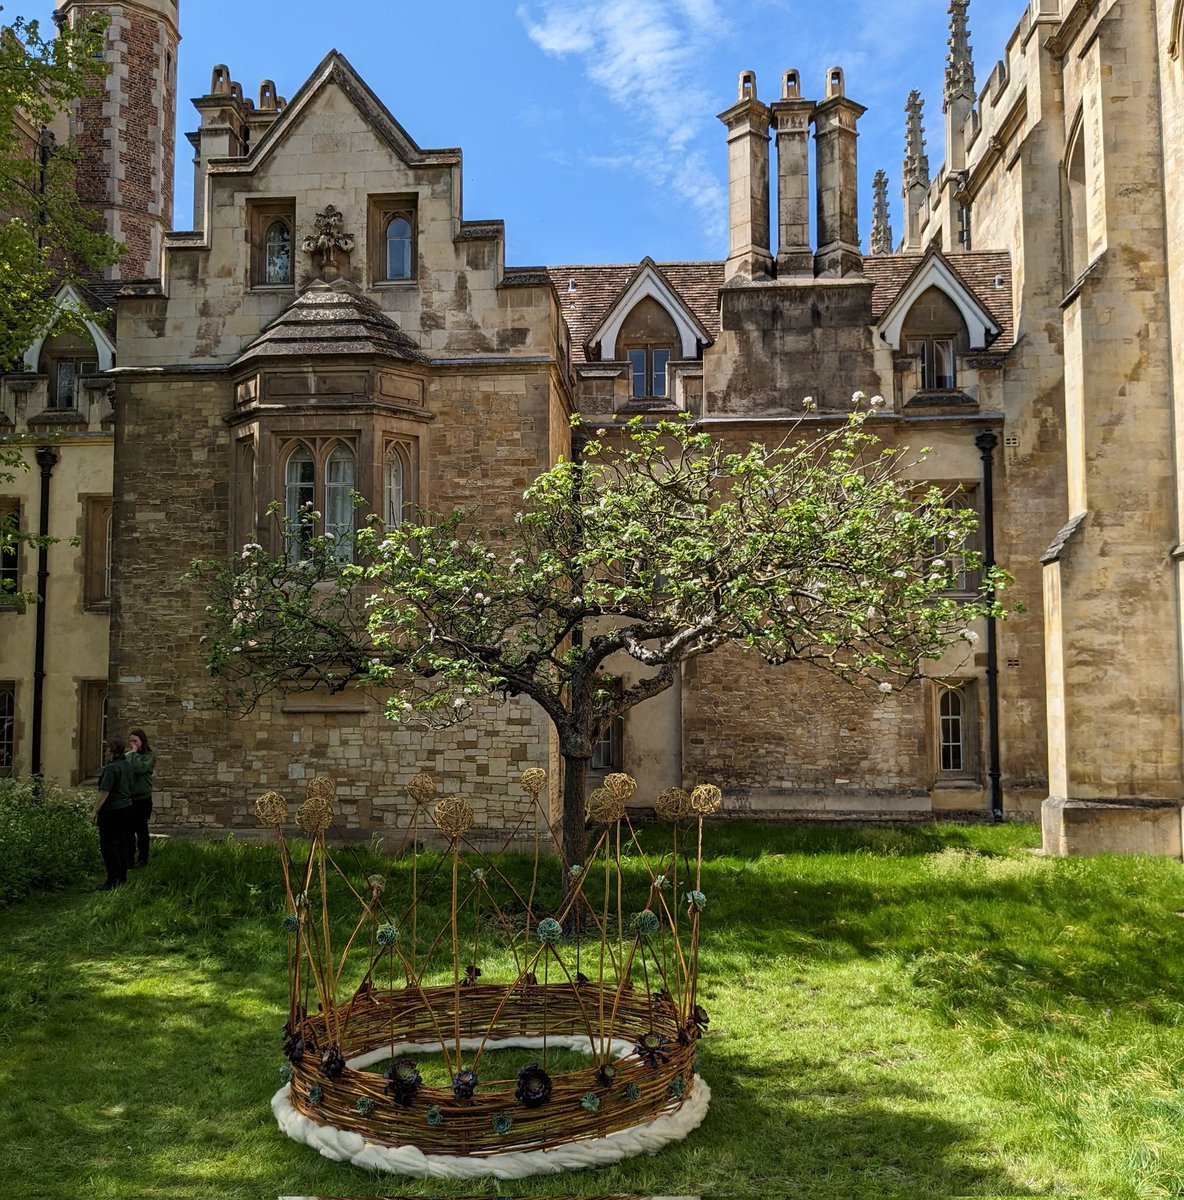 A crown has suddenly appeared in front of Trinity - underneath Newton's apple tree. Gravitas!